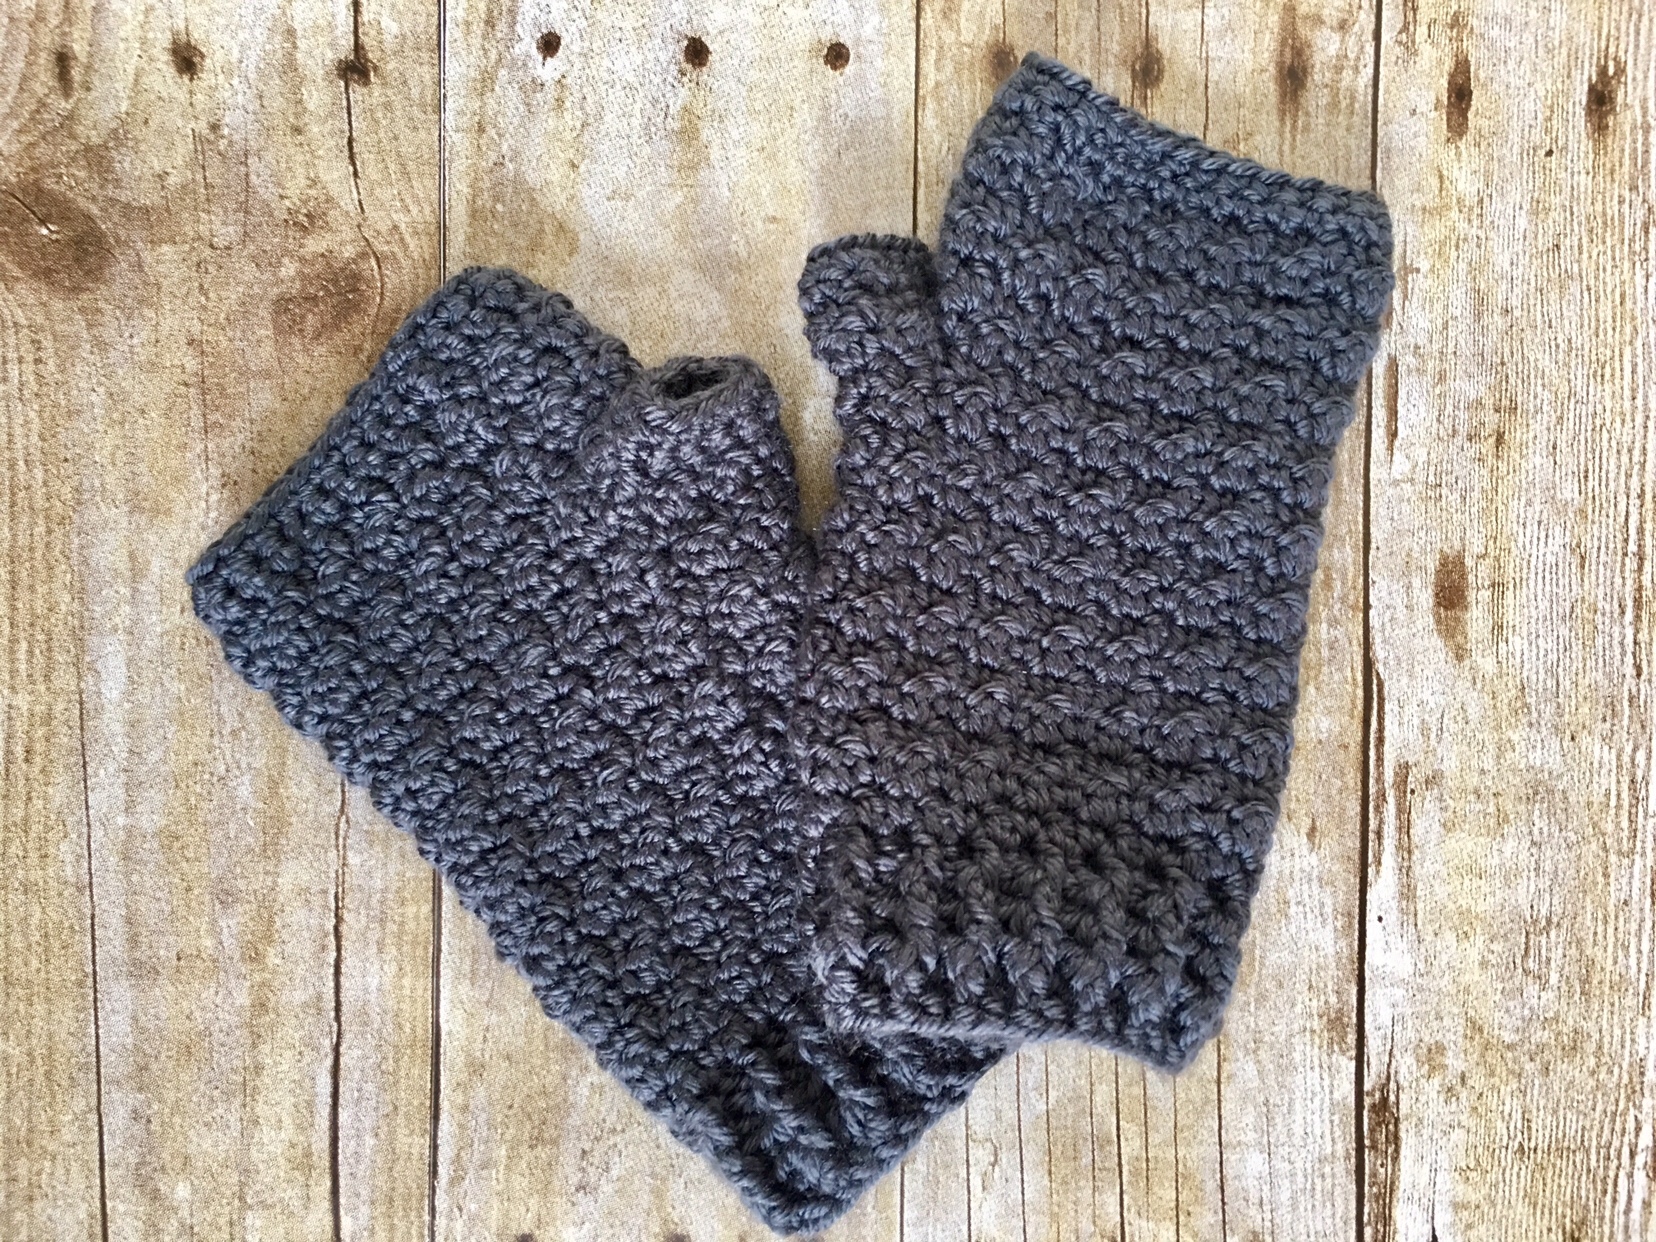 Crochet Mittens, Gloves, and Mitts, Oh My!, Featured Crochet Articles